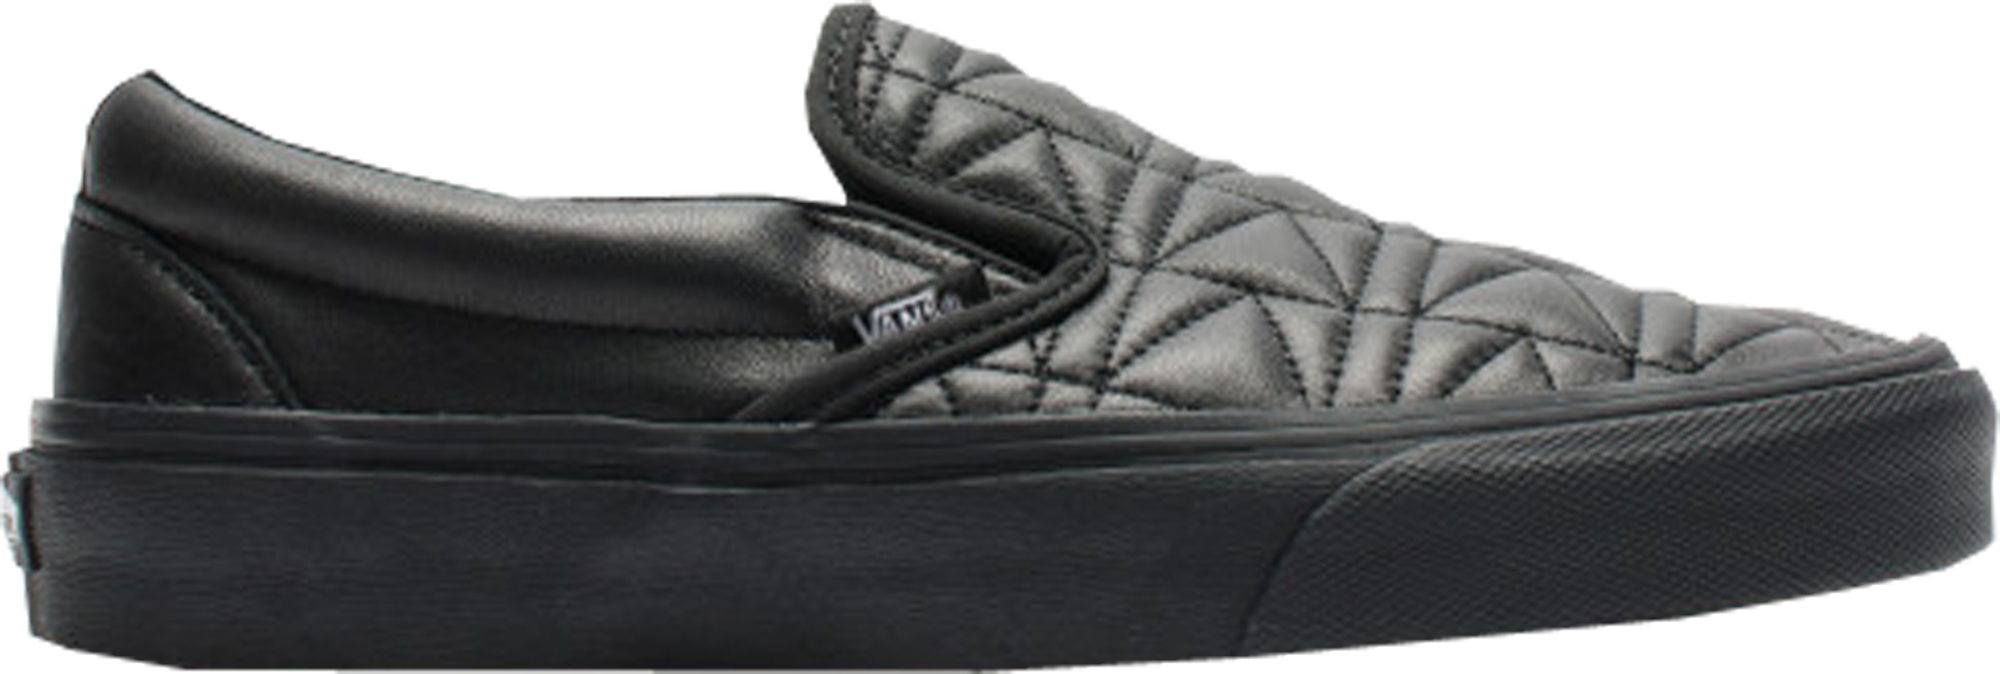 vans quilted leather slip ons